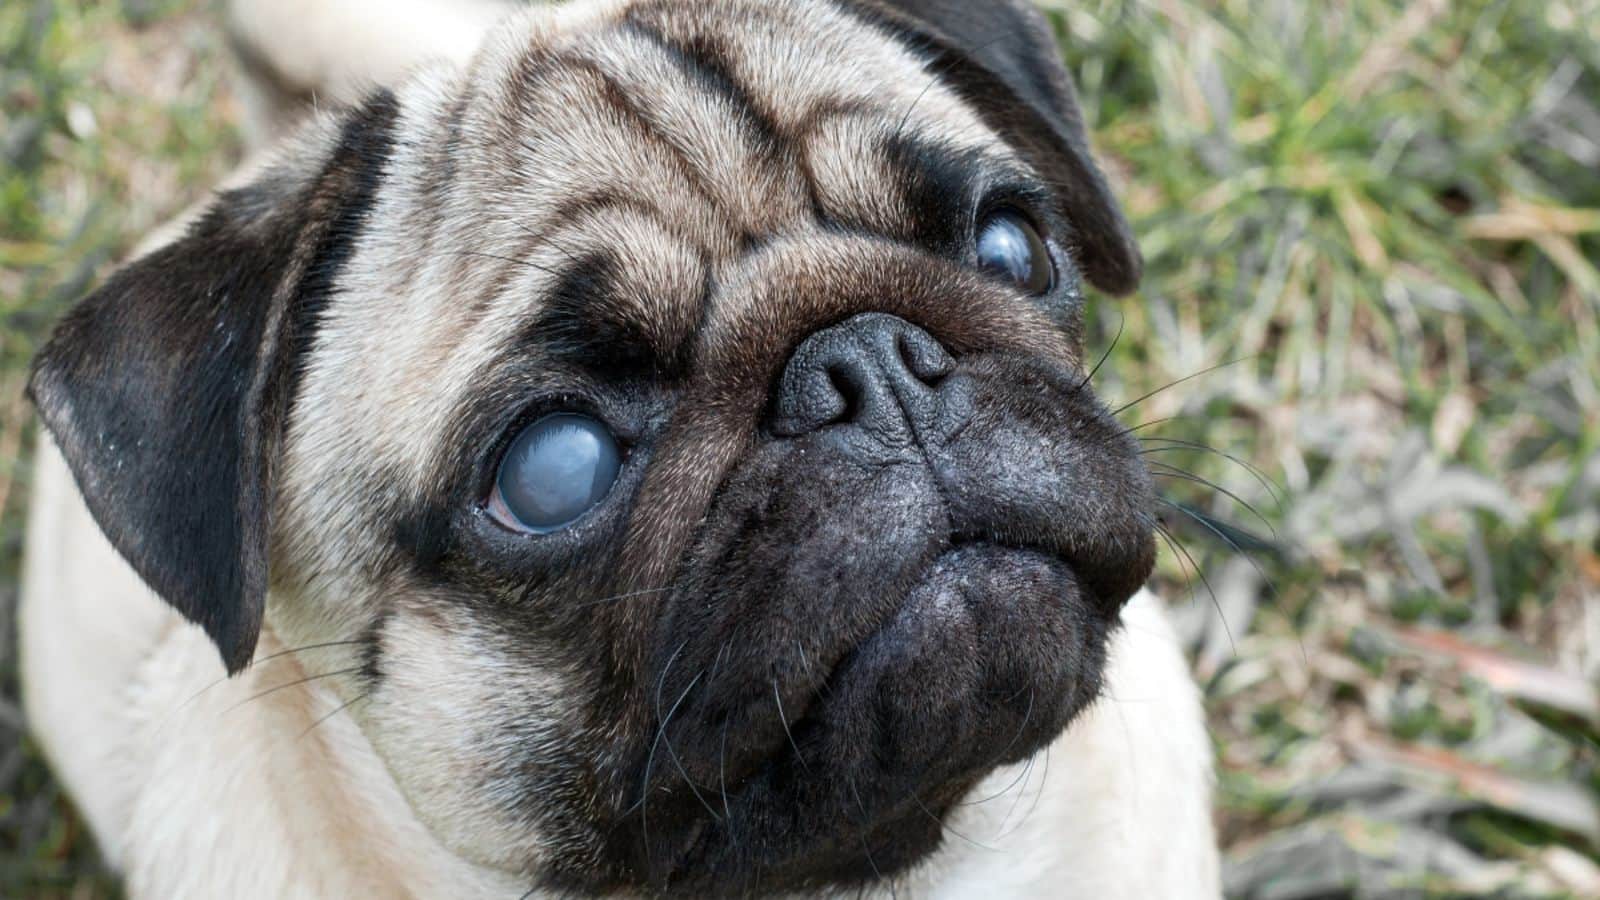 Pug eye care: Tips for keeping your pet's vision clear